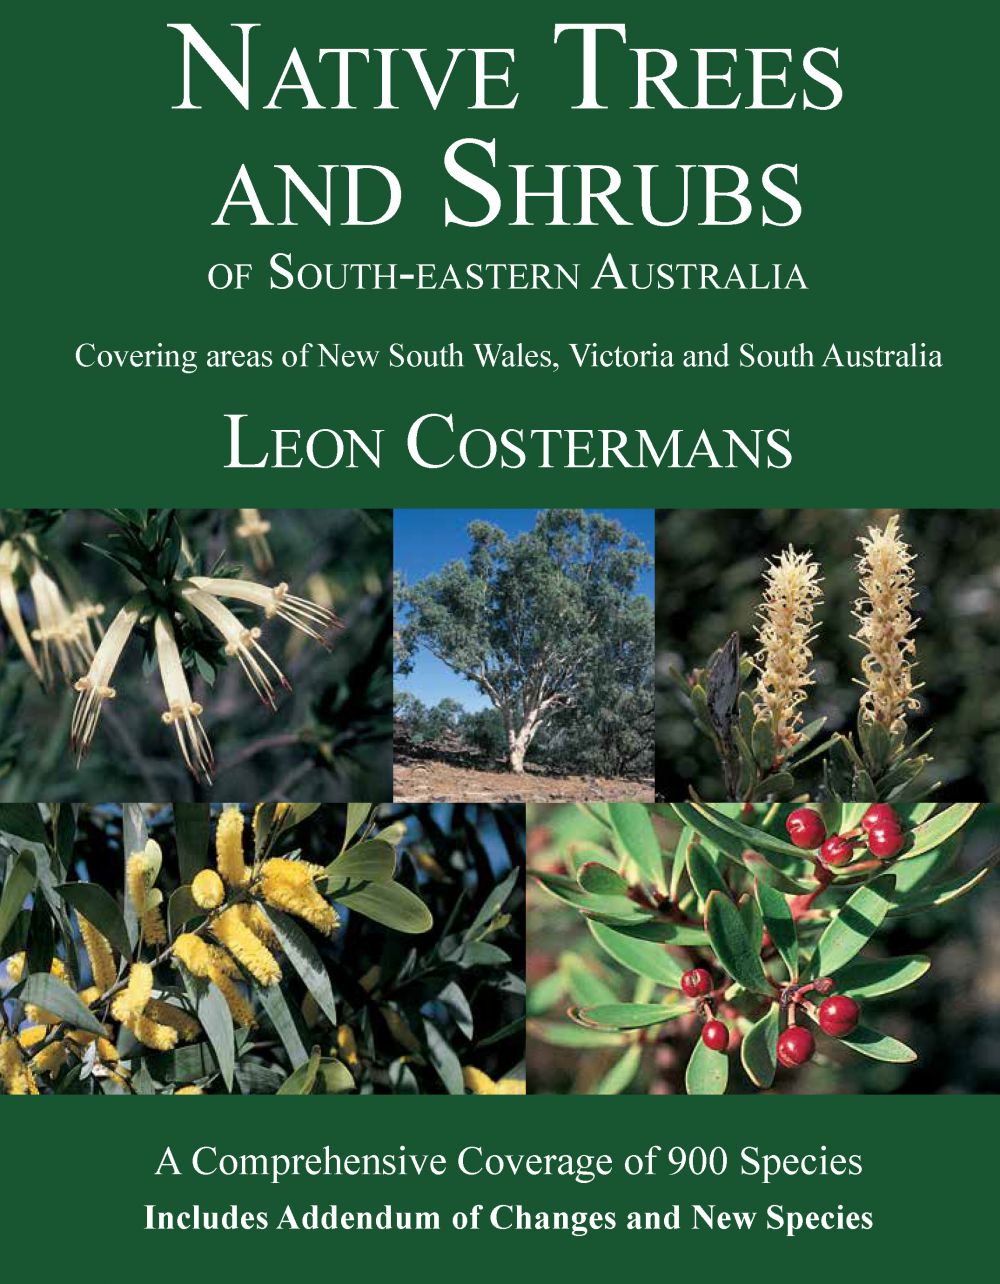 Leon F. Costermans: Native Trees and Shrubs of South-eastern Australia (Paperback, en-Latn-AU language, 2009, Reed New Holland)